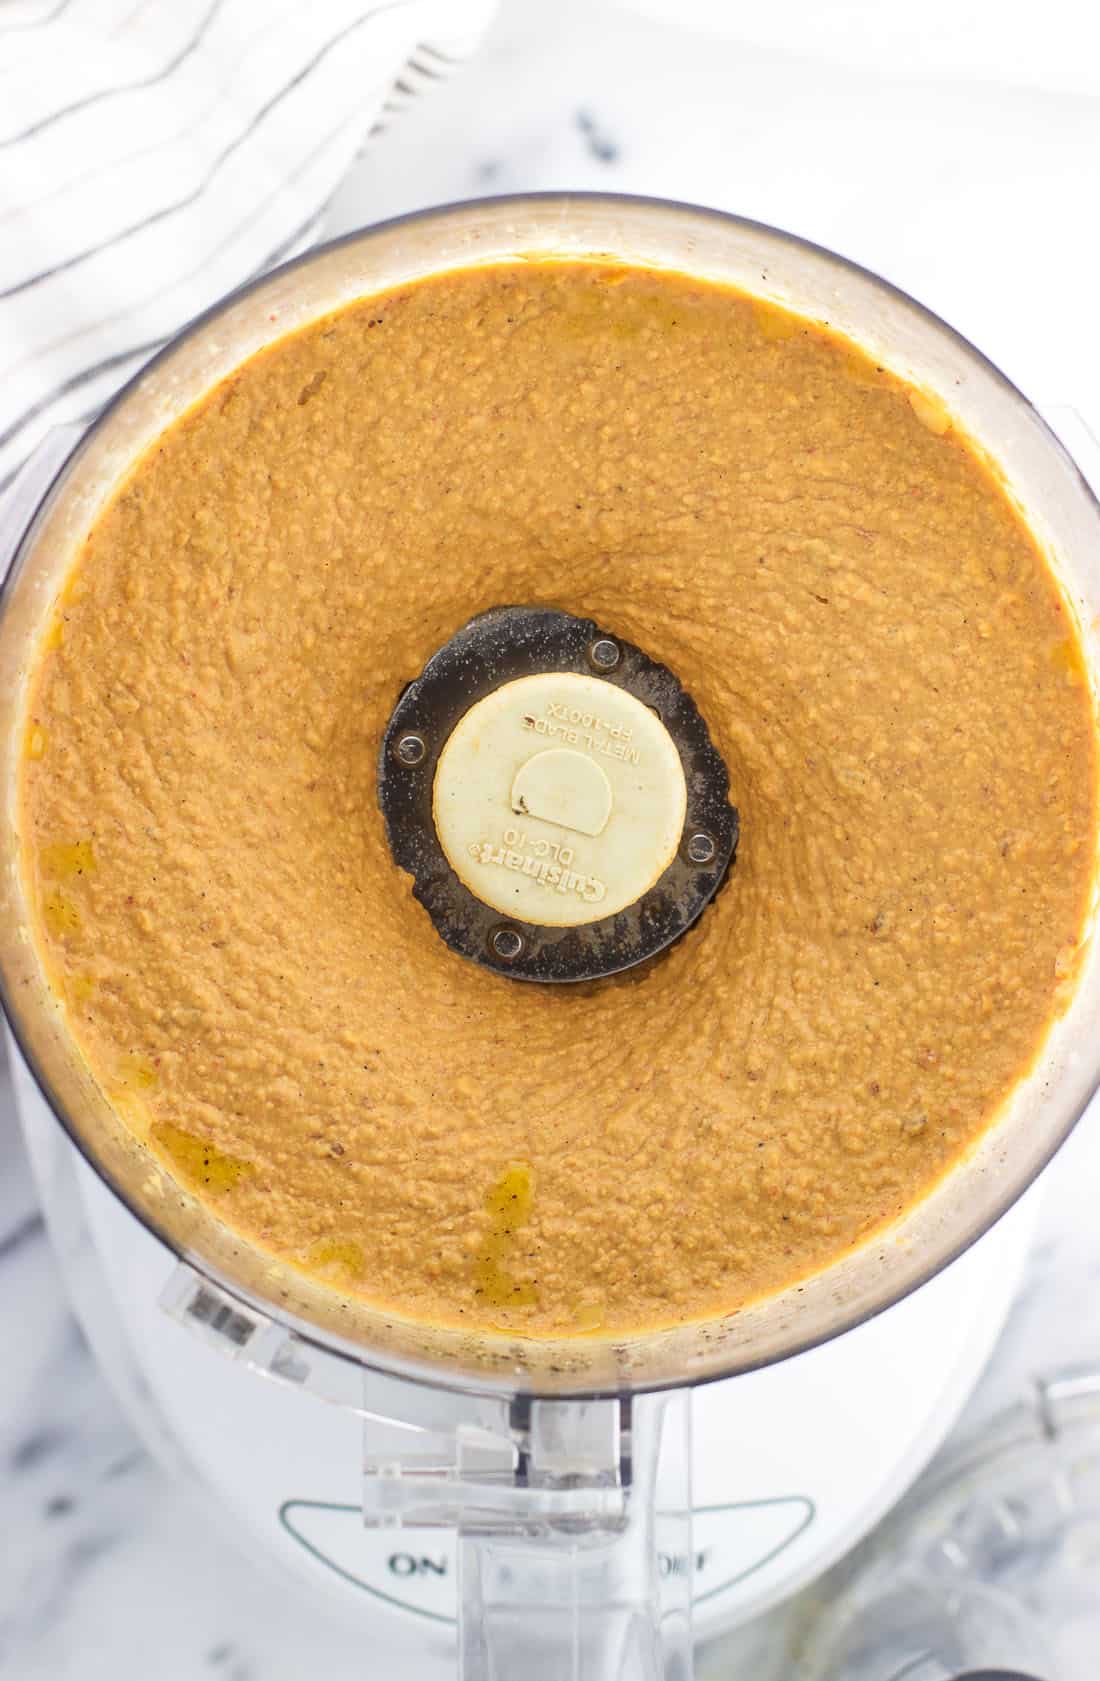 The hummus blended up in the food processor